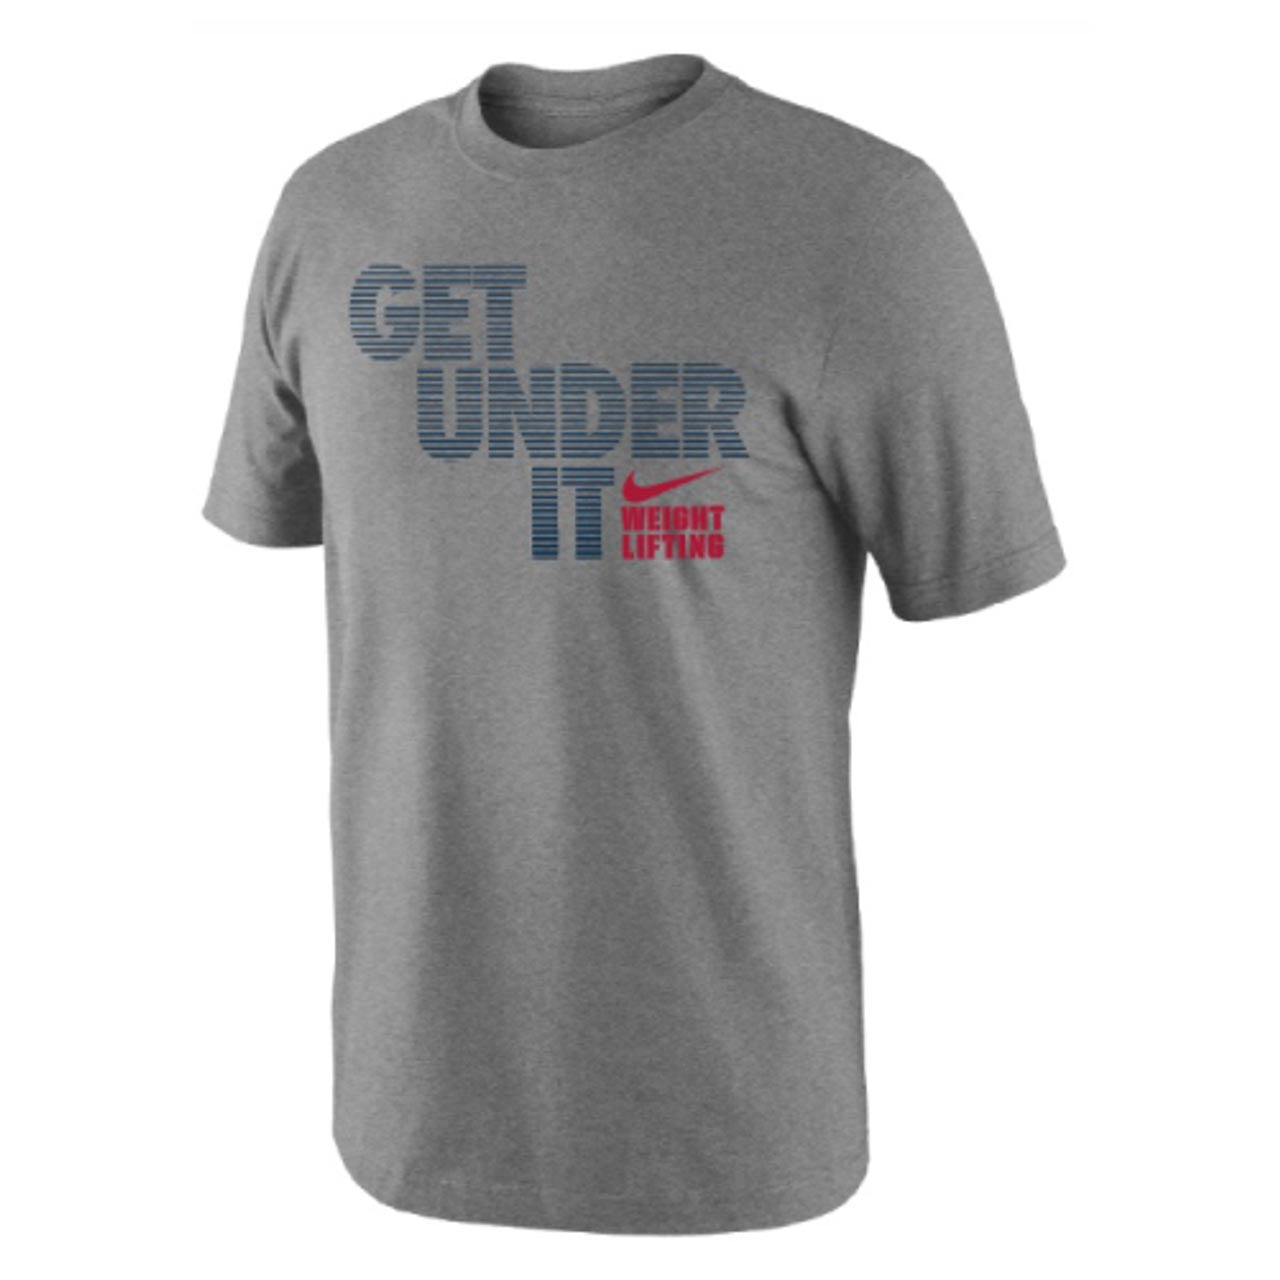 Nike Weightlifting Get Under It T-Shirt